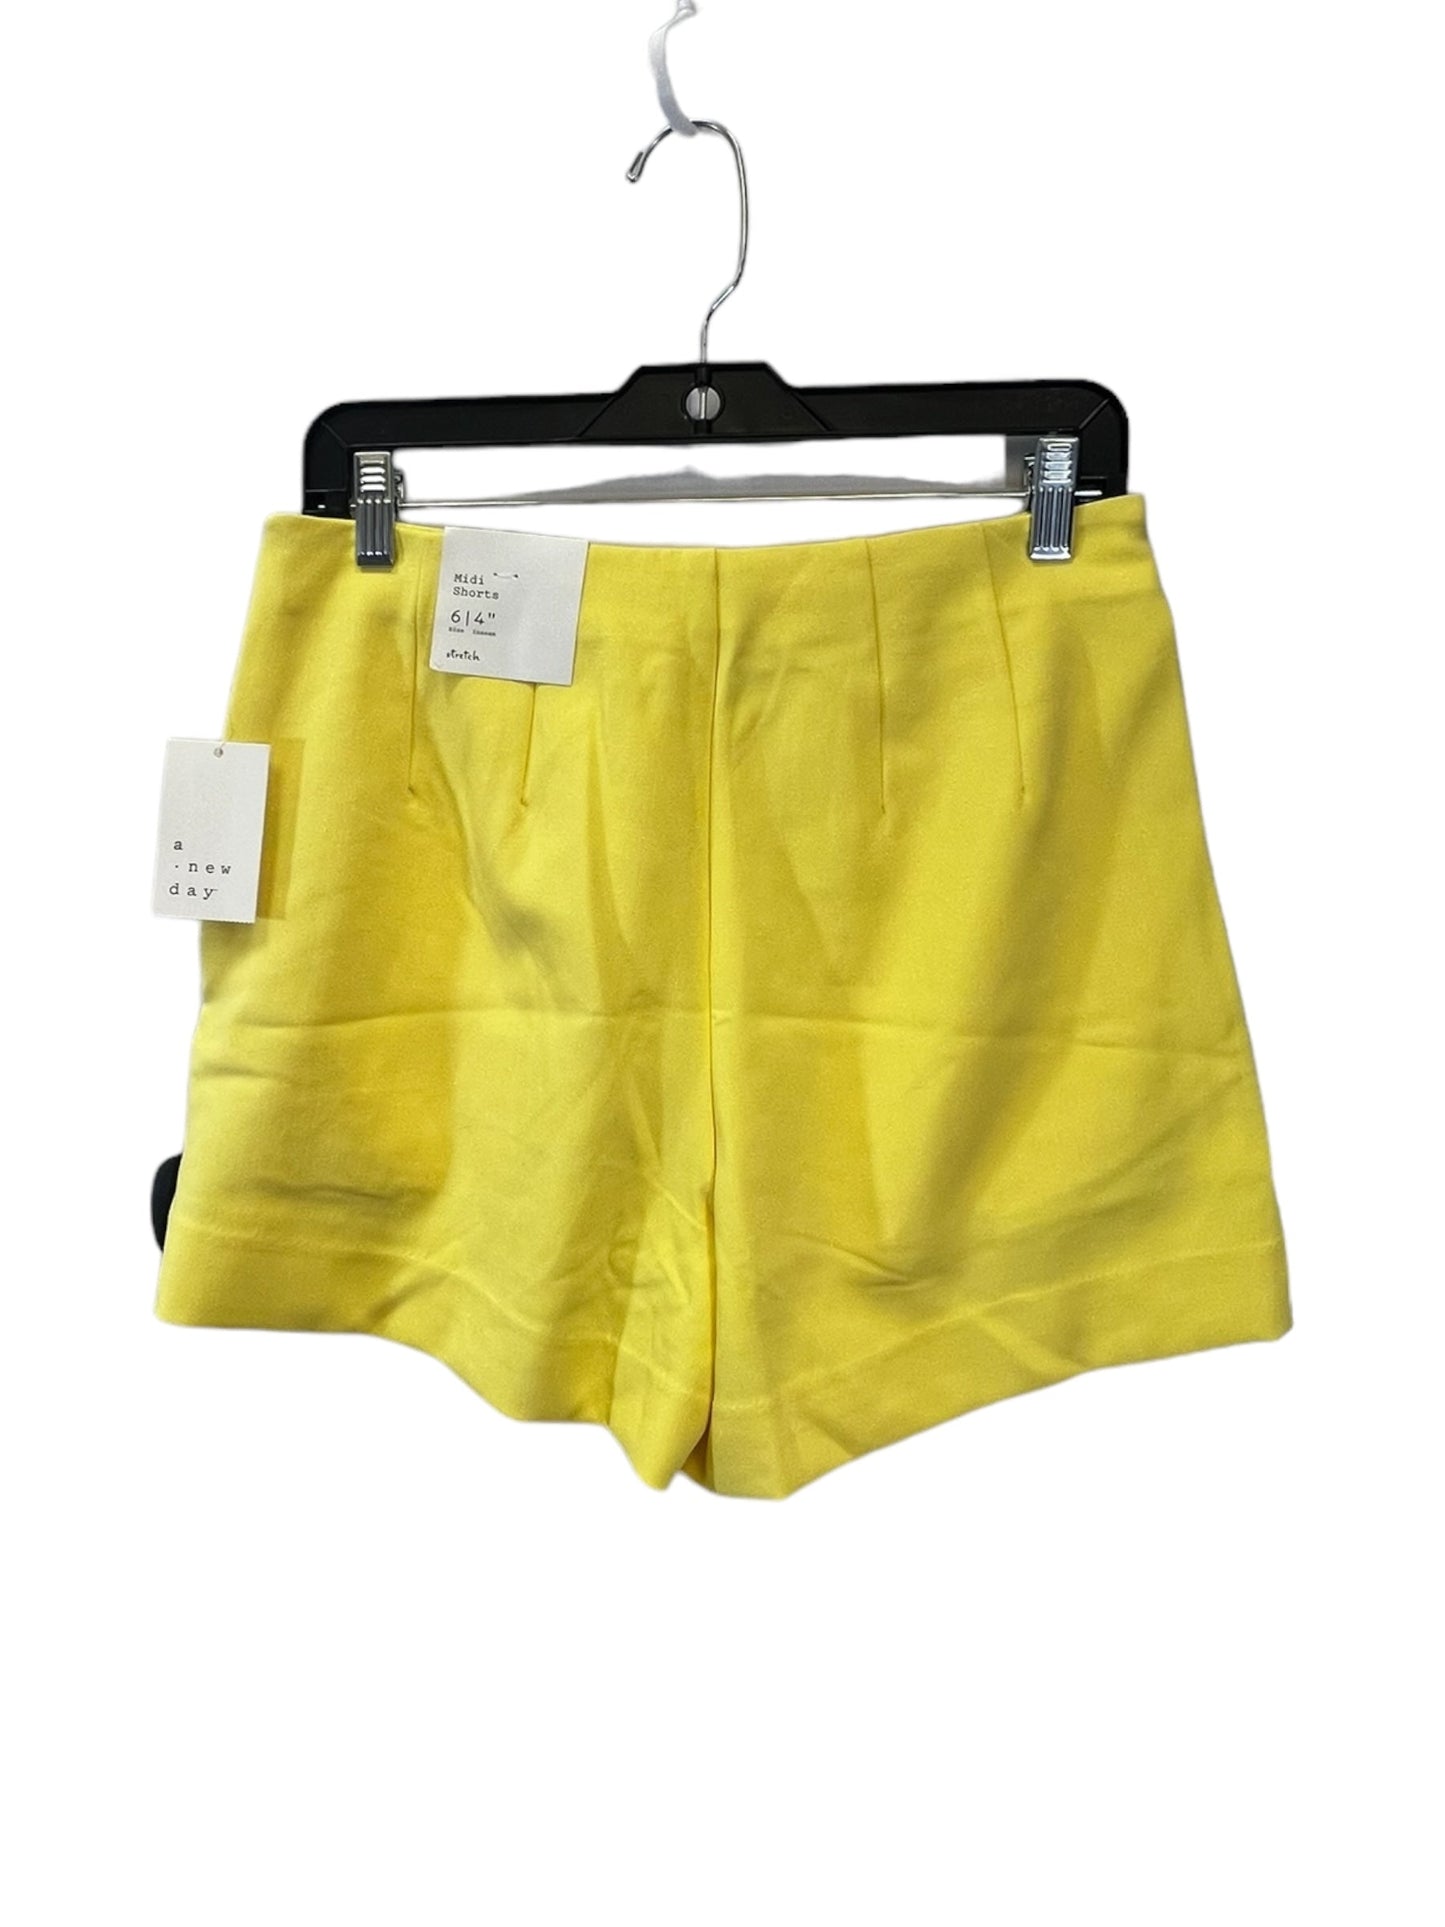 Yellow Shorts A New Day, Size 6